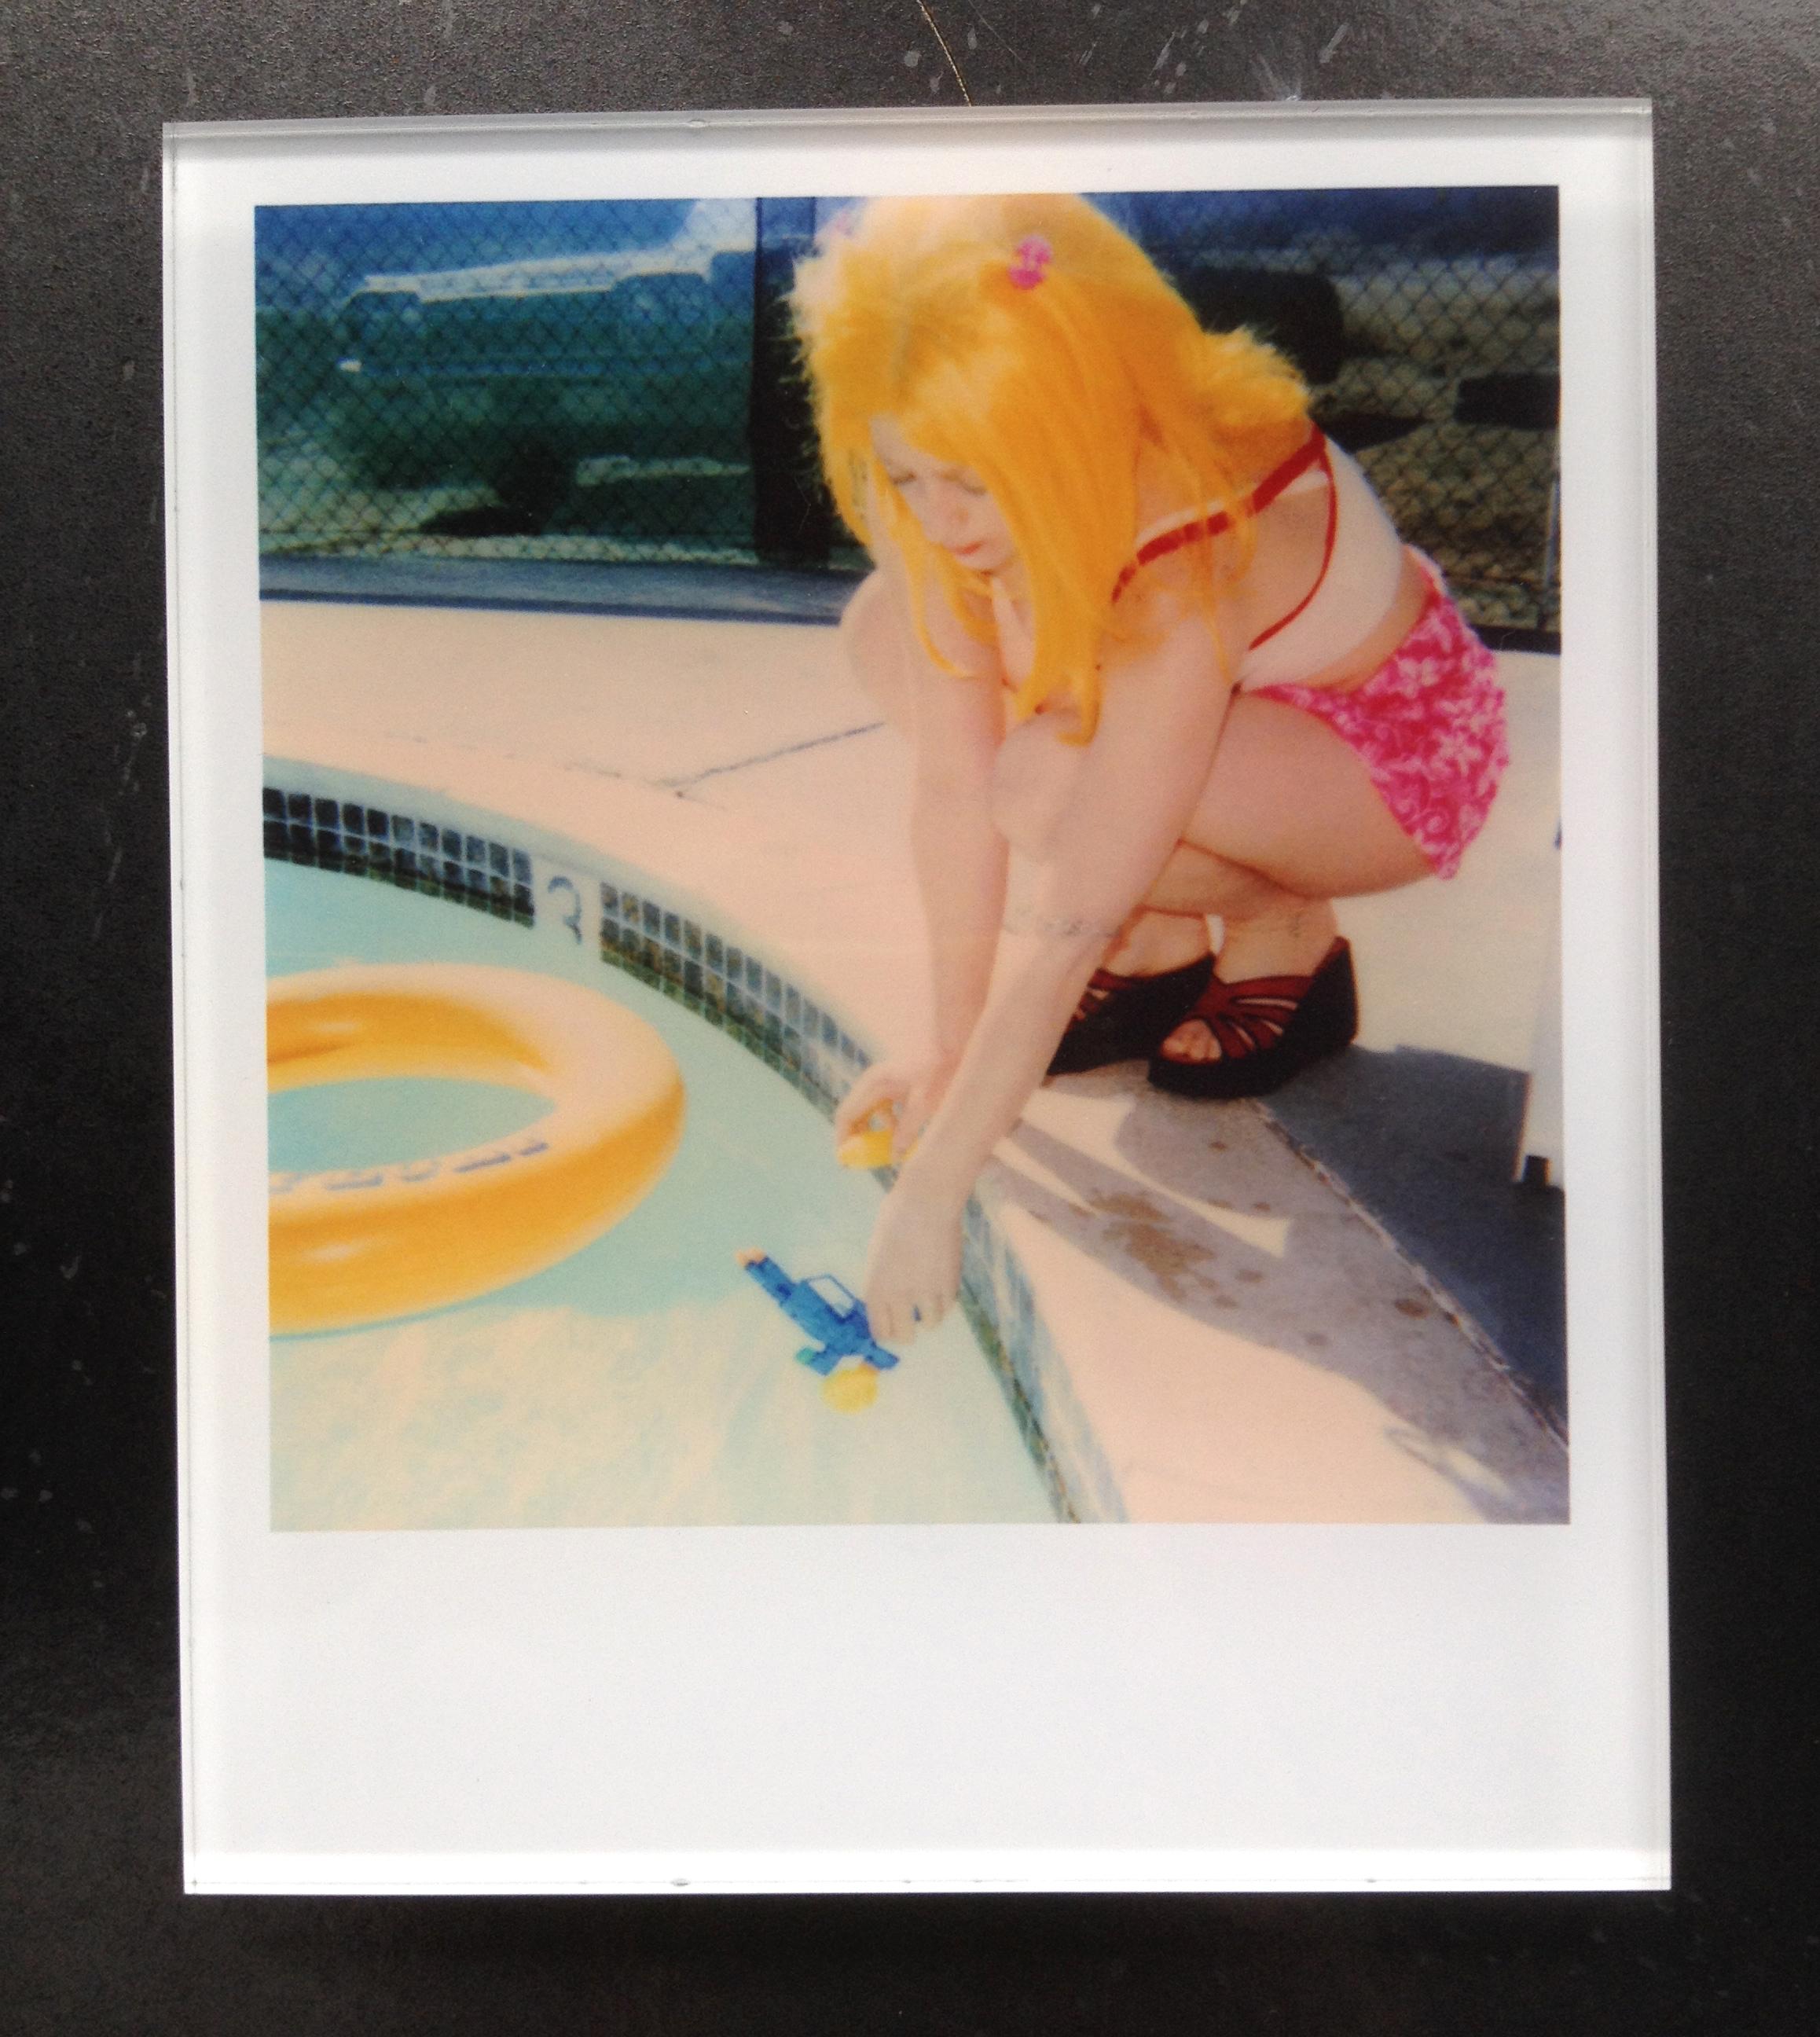 Stefanie Schneider's Minis
'Max by the Pool' (29 Palms, CA), 1999
signed and signature brand on verso
Lambda digital Color Photographs based on a Polaroid

Polaroid sized open Editions 1999-2013
10.7 x 8.8cm (Image 7.9x7.7cm)
mounted: sandwiched in